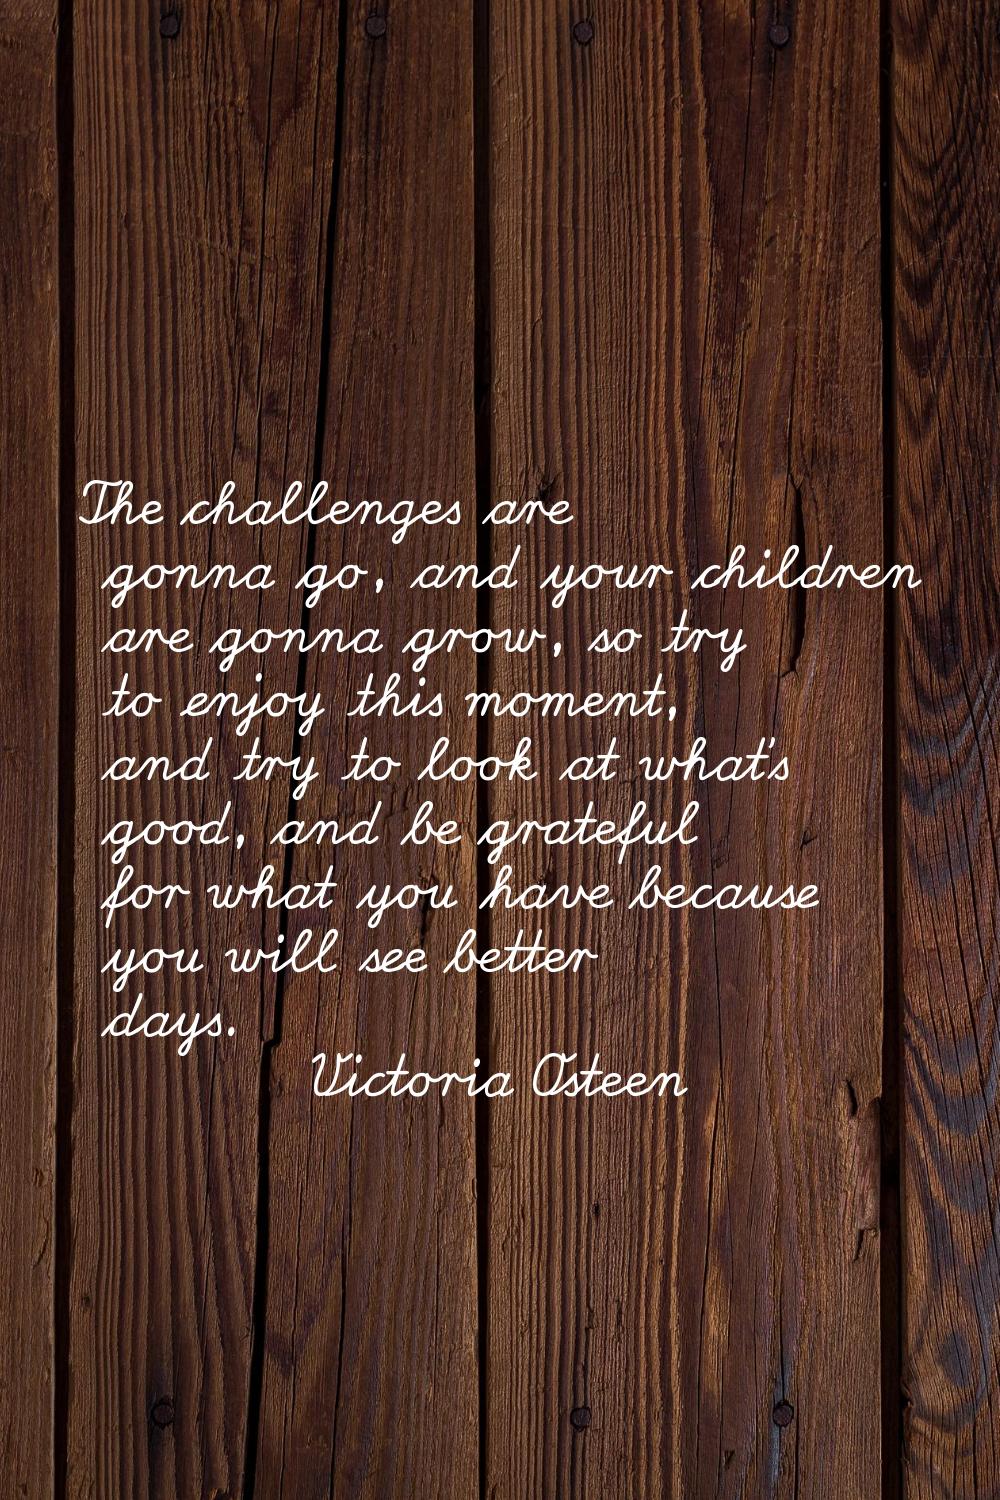 The challenges are gonna go, and your children are gonna grow, so try to enjoy this moment, and try